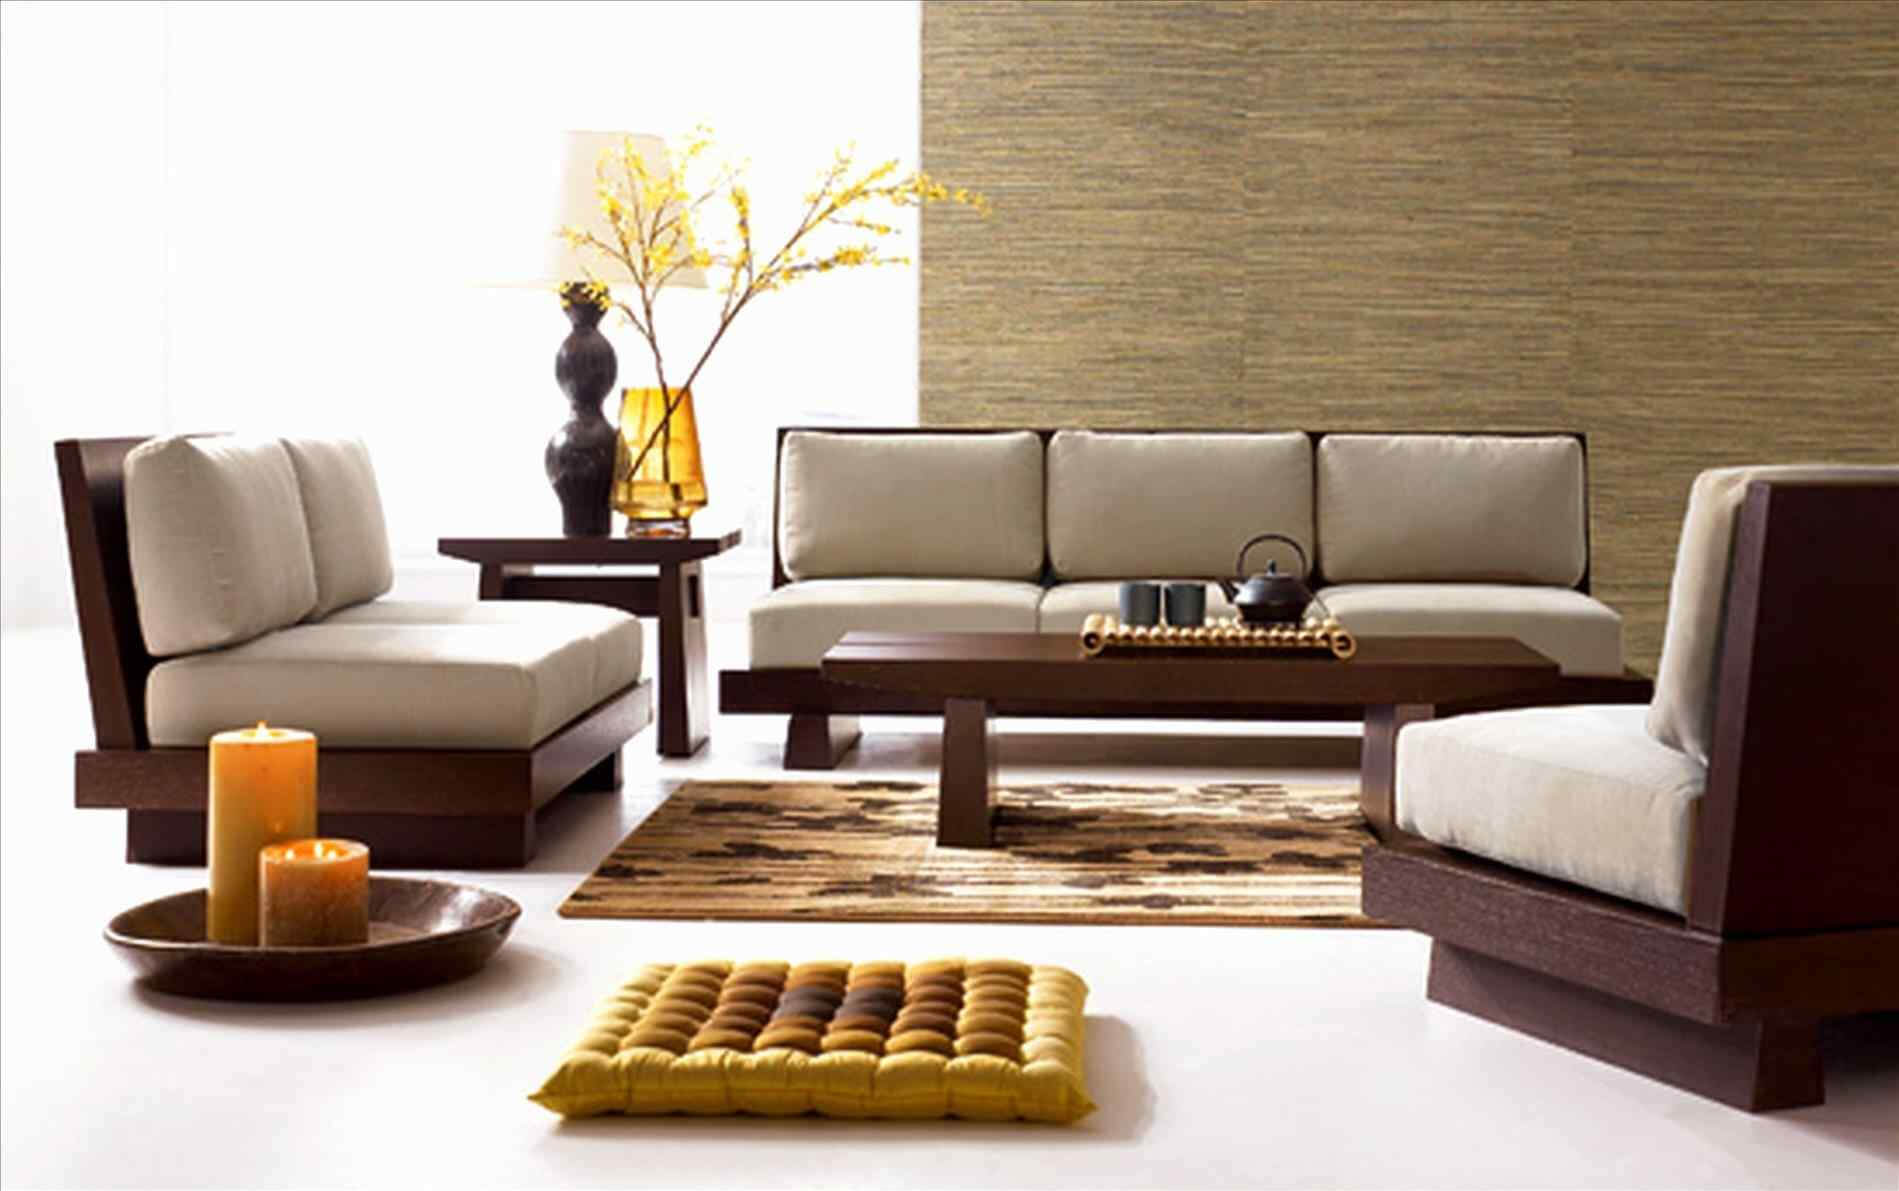 Minimalist Zen Living Room: A Peaceful World Within